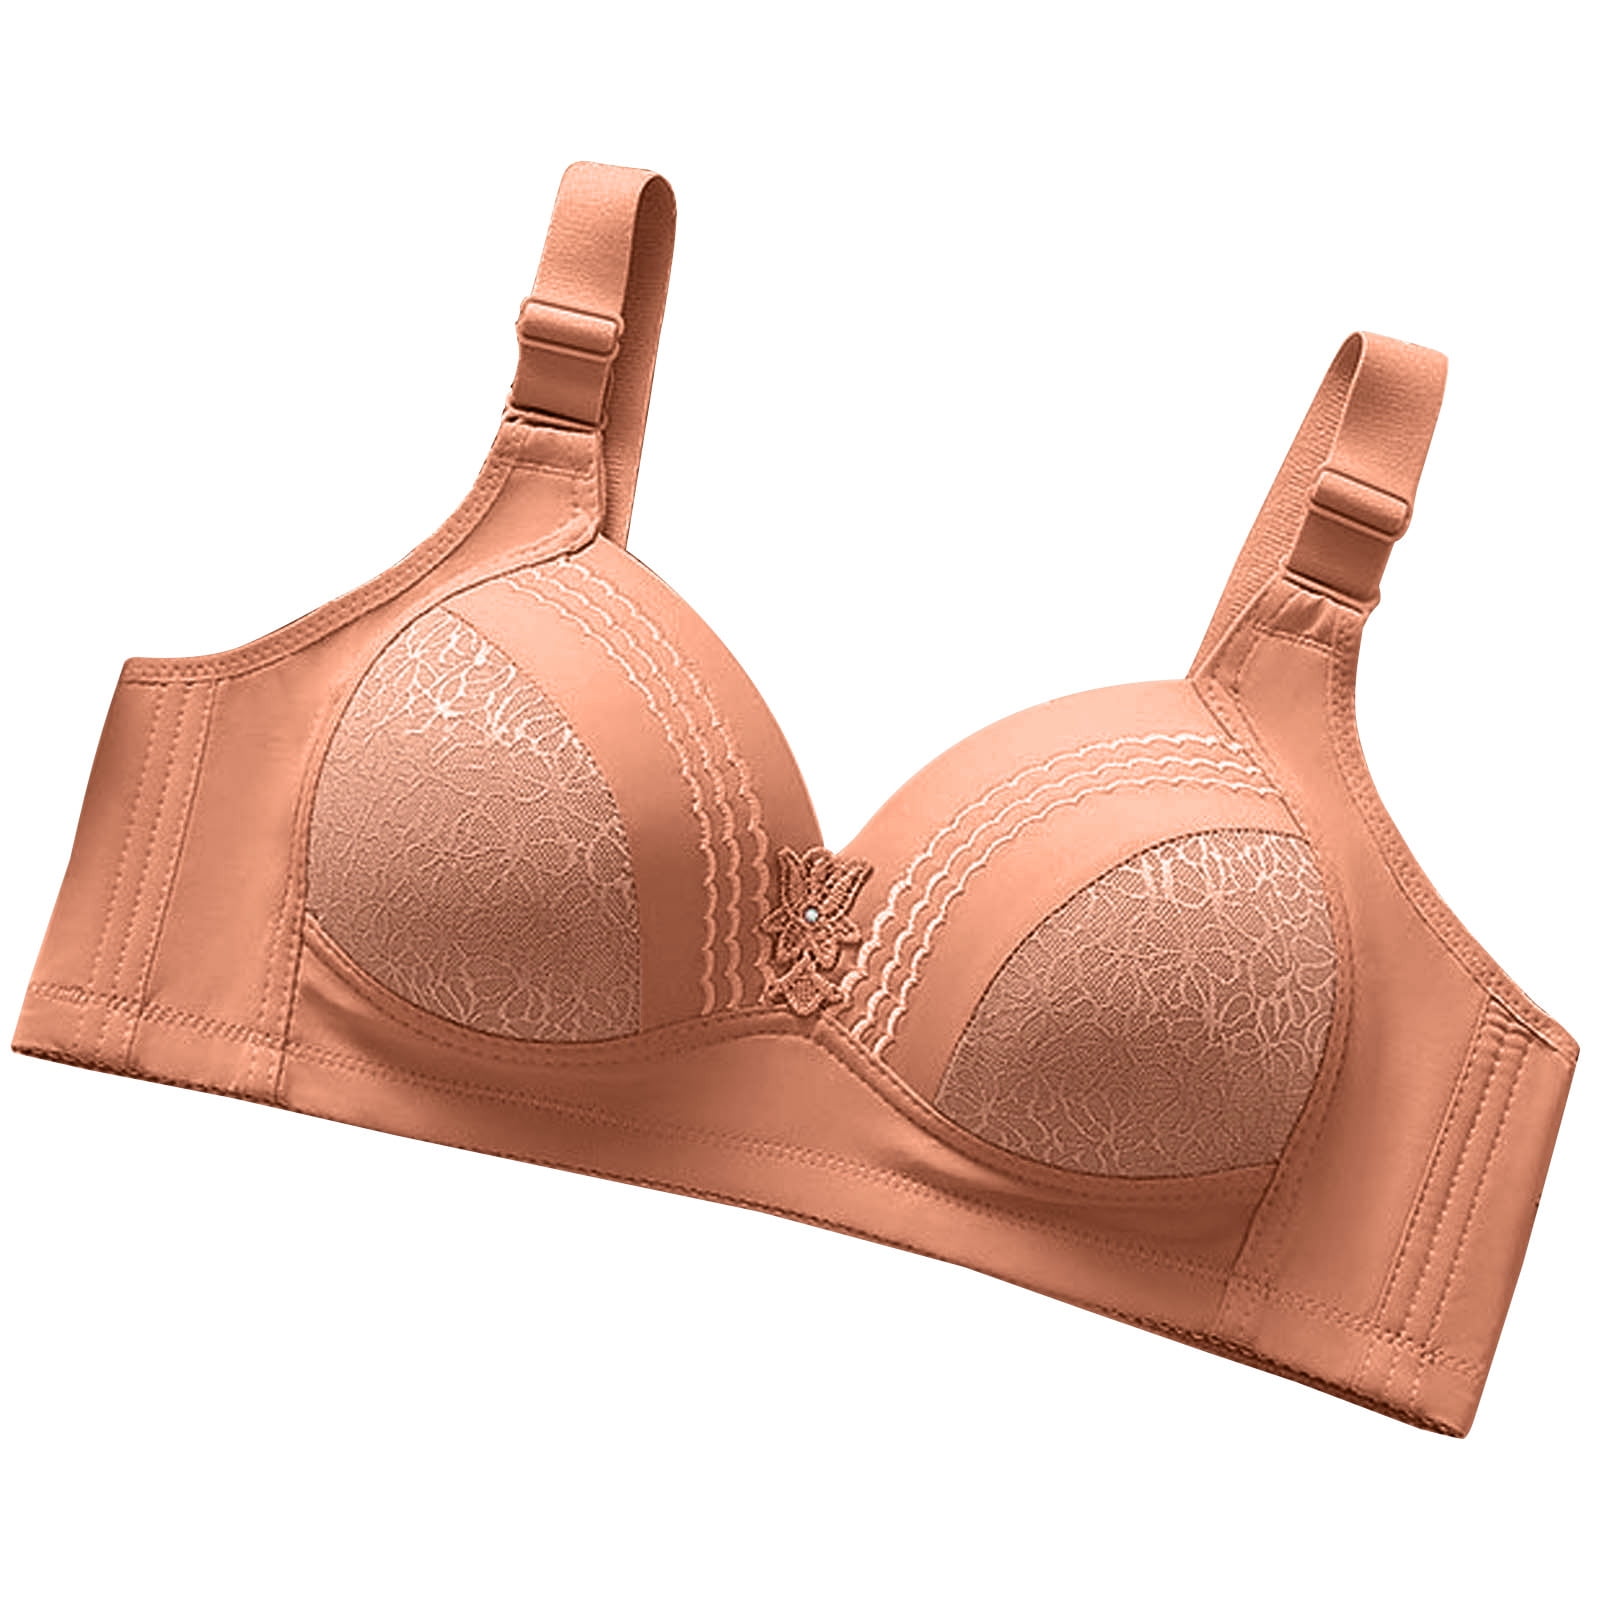 hoksml Bras For Women Side Retraction No Steel Ring Underwear Strap Type  Thin Mould Cup Breathable Bra Lingerie For Women Clearance